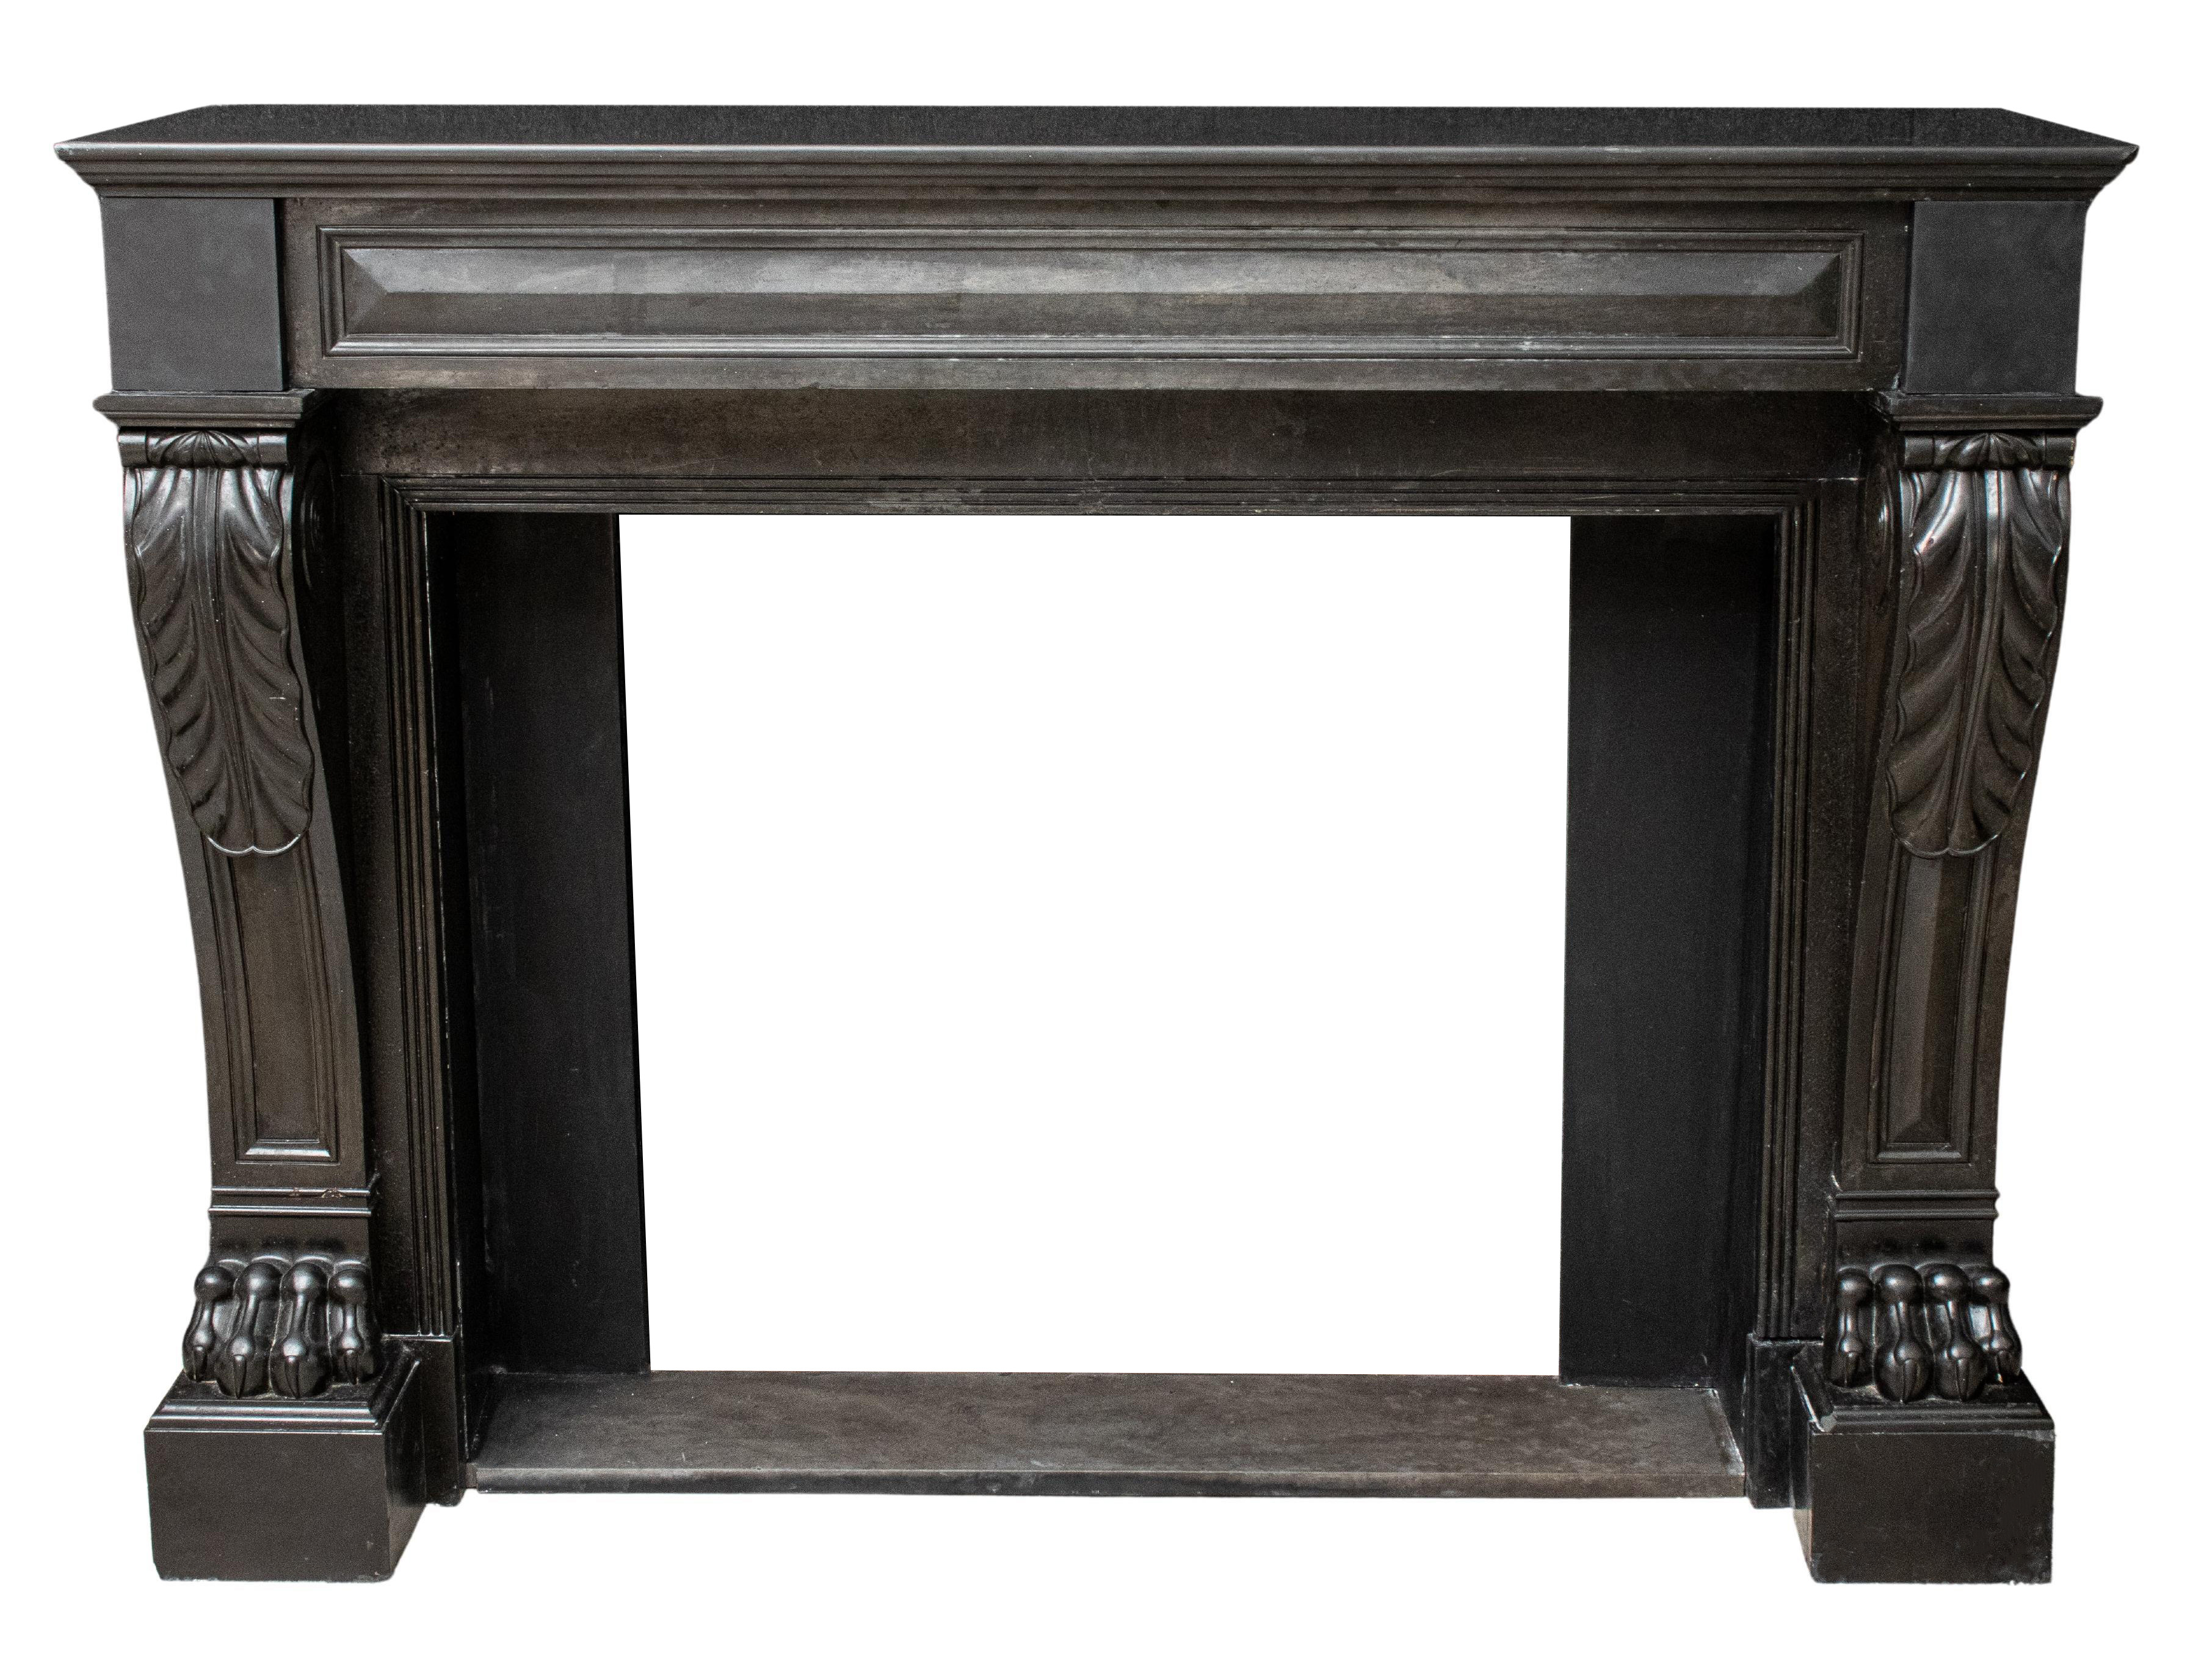 FRENCH CHARLES X BLACK MARBLE FIREPLACE 2fb98b